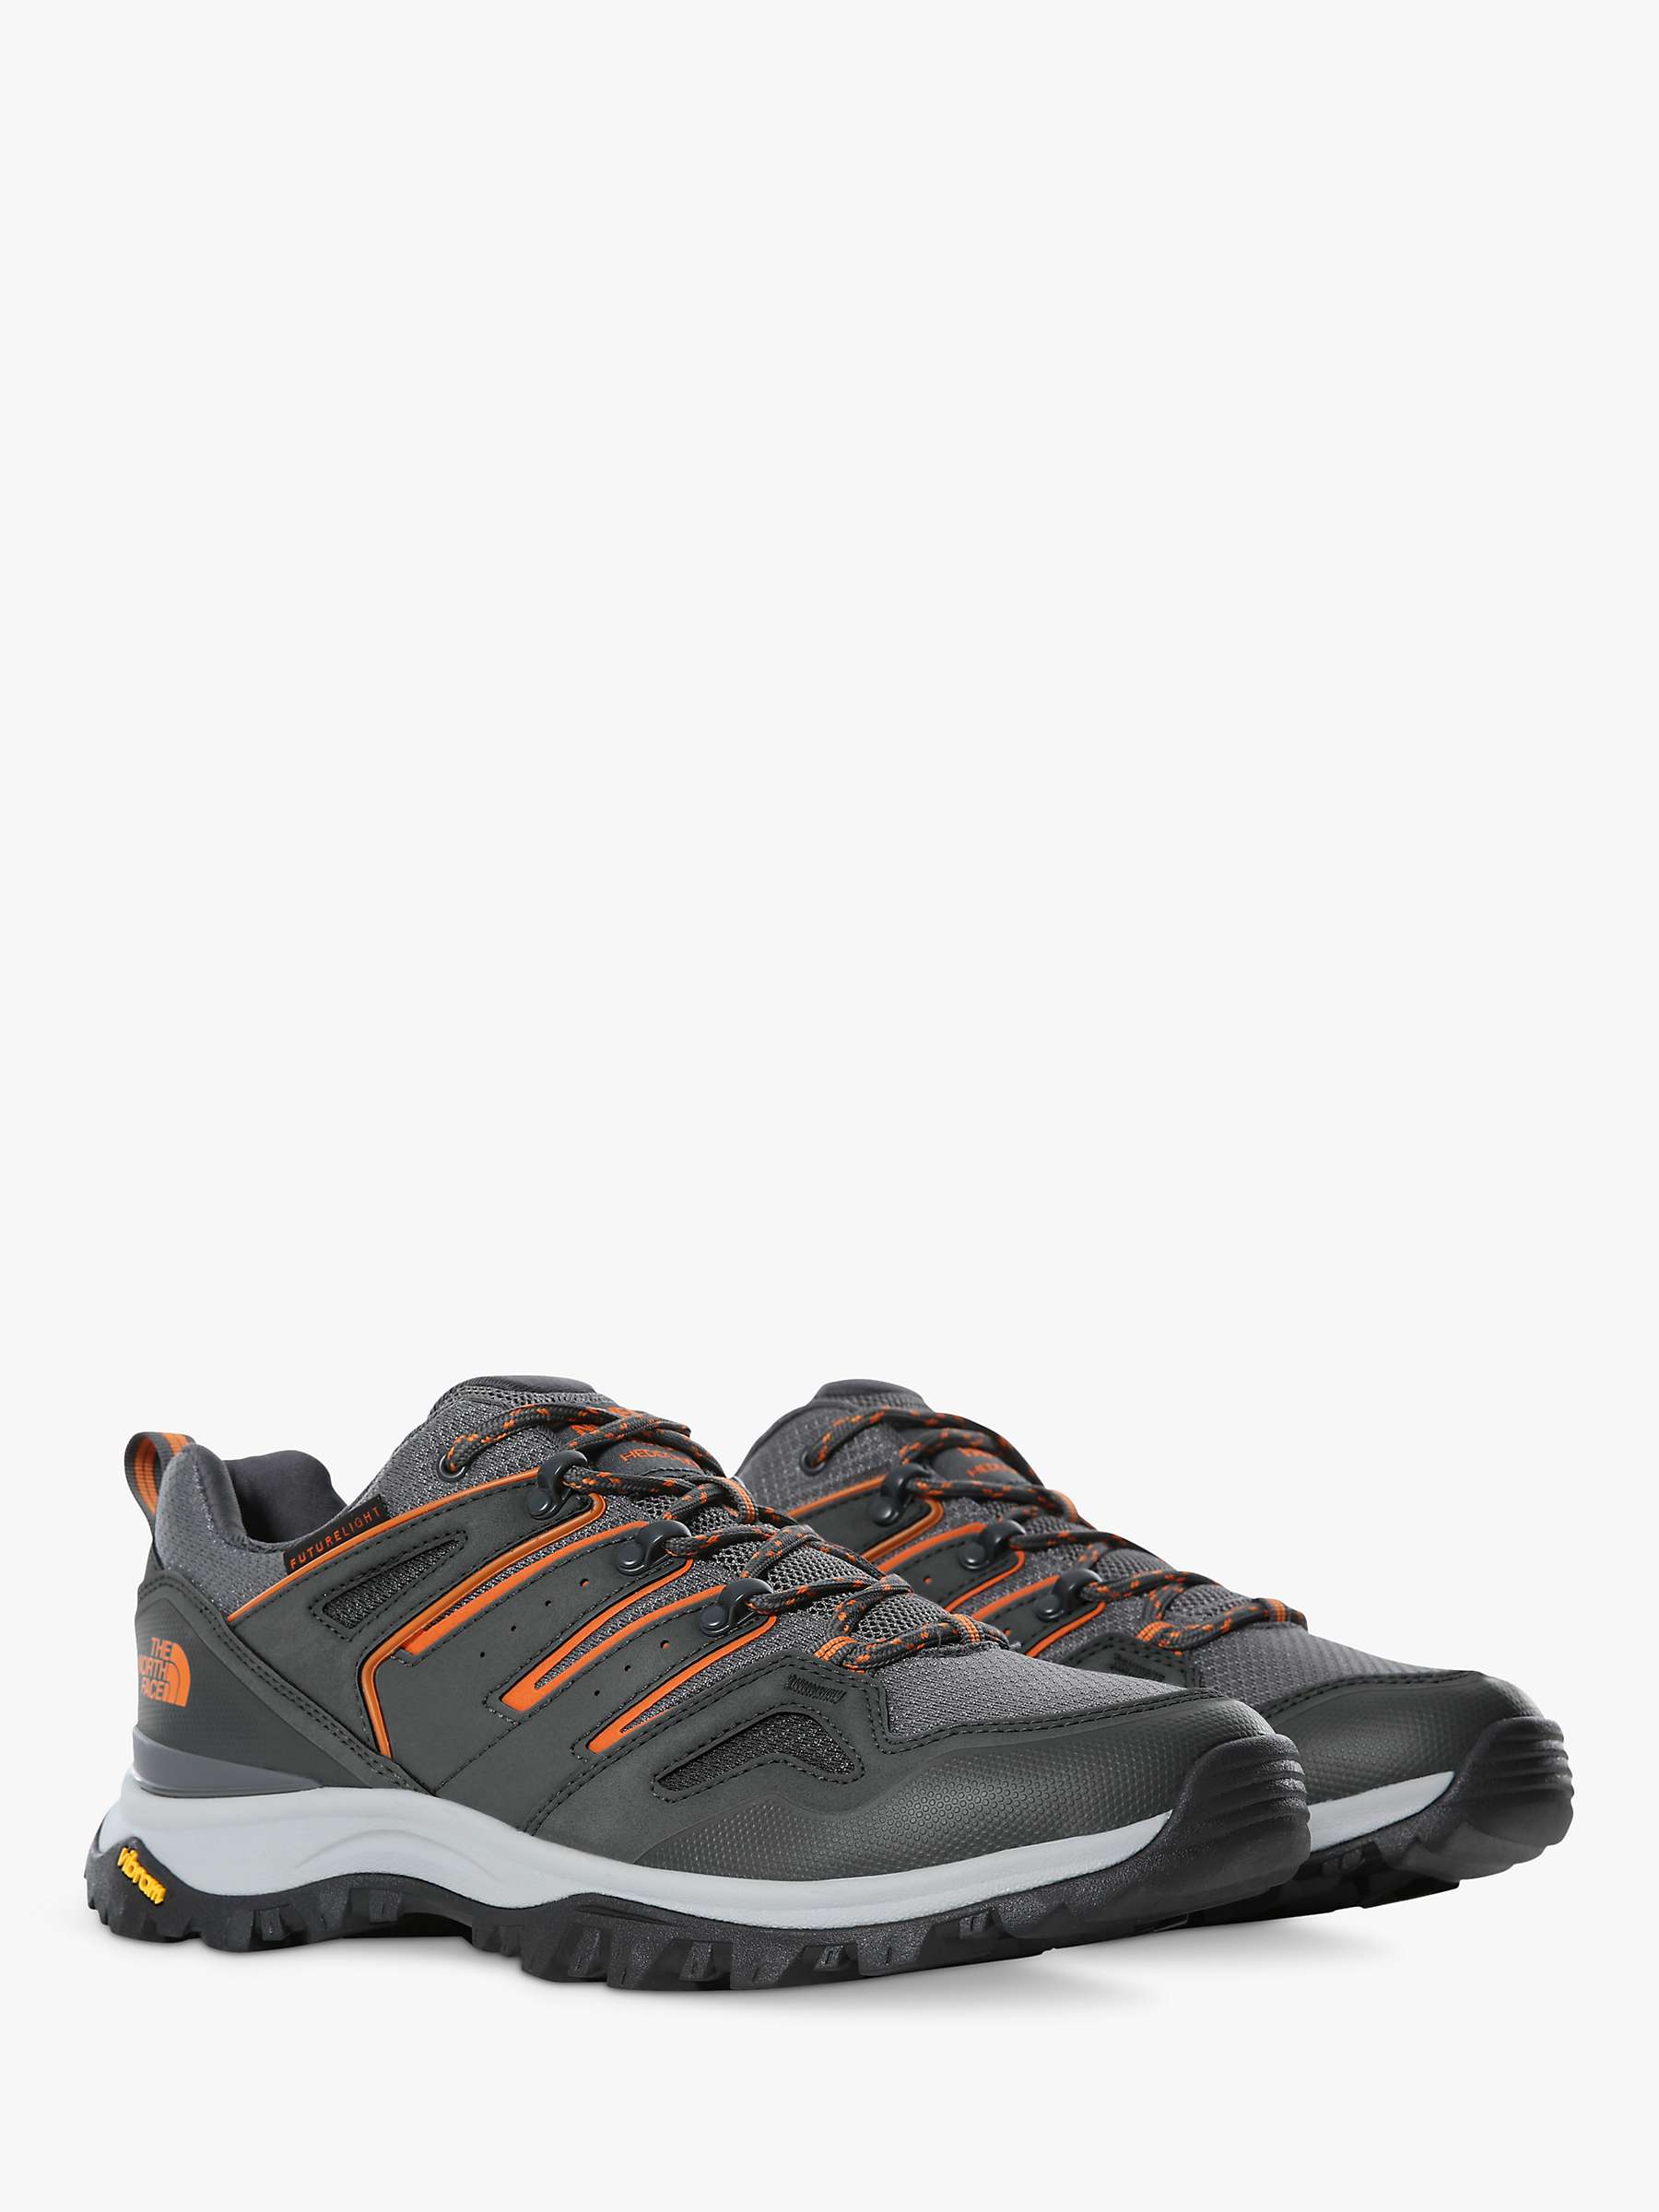 Buy The North Face Hedgehog FUTURELIGHT™ Men's Waterproof Hiking Shoes Online at johnlewis.com